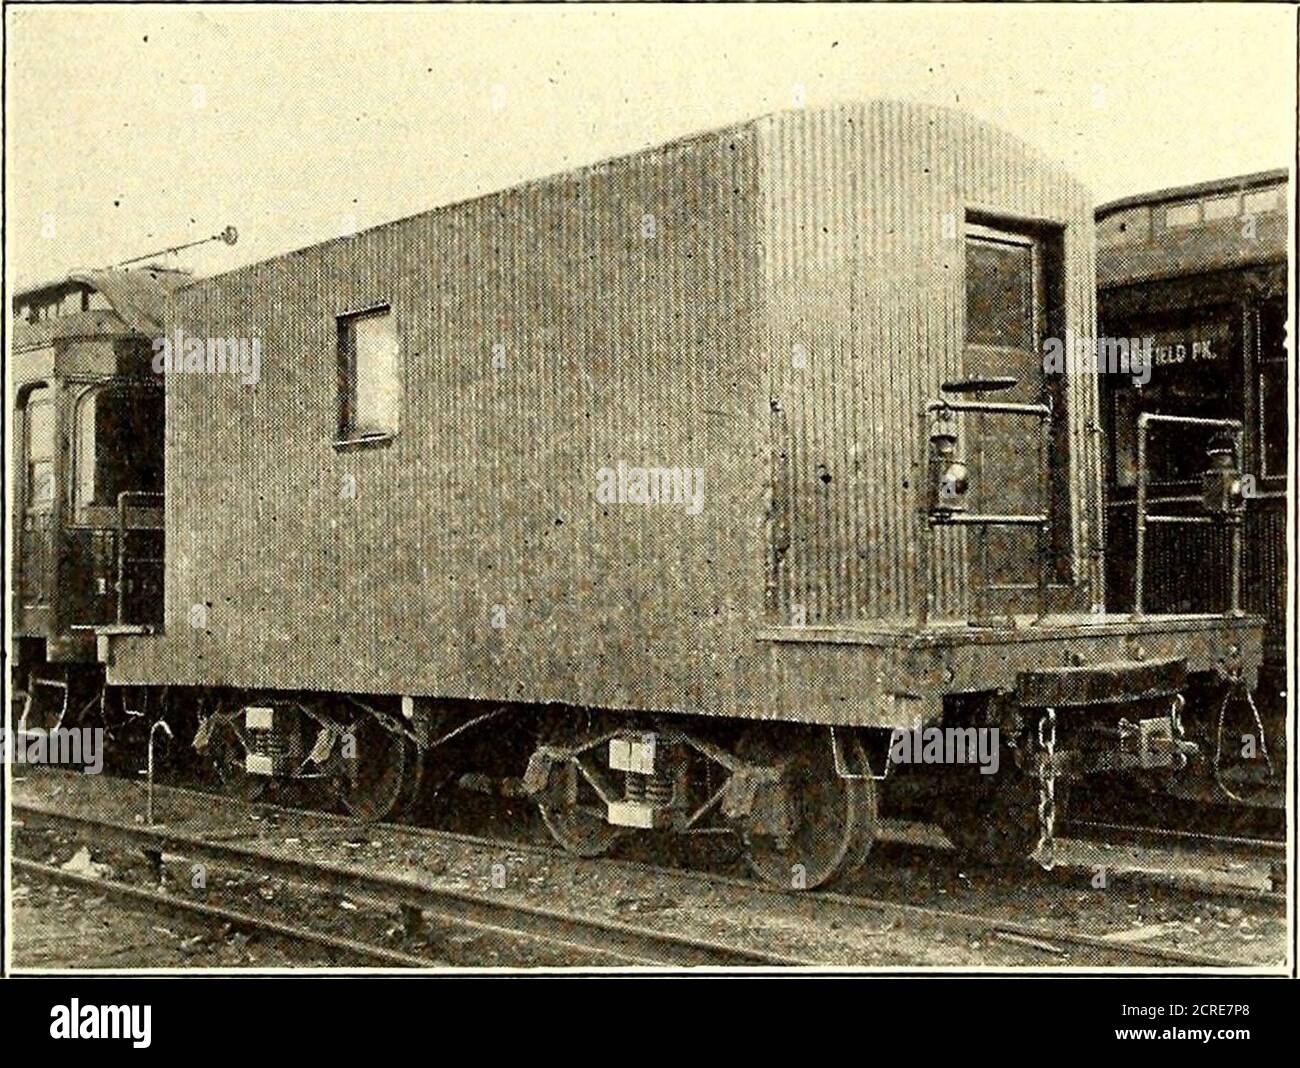 . Electric railway journal . tside of J^-in. poplar sheathing. The body islined with l/2-m. poplar, and a double floor of %-. pineinterlaid with building paper is provided, which makes thecar sufficiently weatherproof to prevent the solutions fromfreezing at low temperatures when the electric heaters arein service. Wire glass was included in the two doors andwindows to reduce breakage which might be expected inthe rush during a fire. Since the car is operated as a trailerit requires no other electrical equipment than the light-ing and heating circuits, and these are supplied with electri-cal e Stock Photo